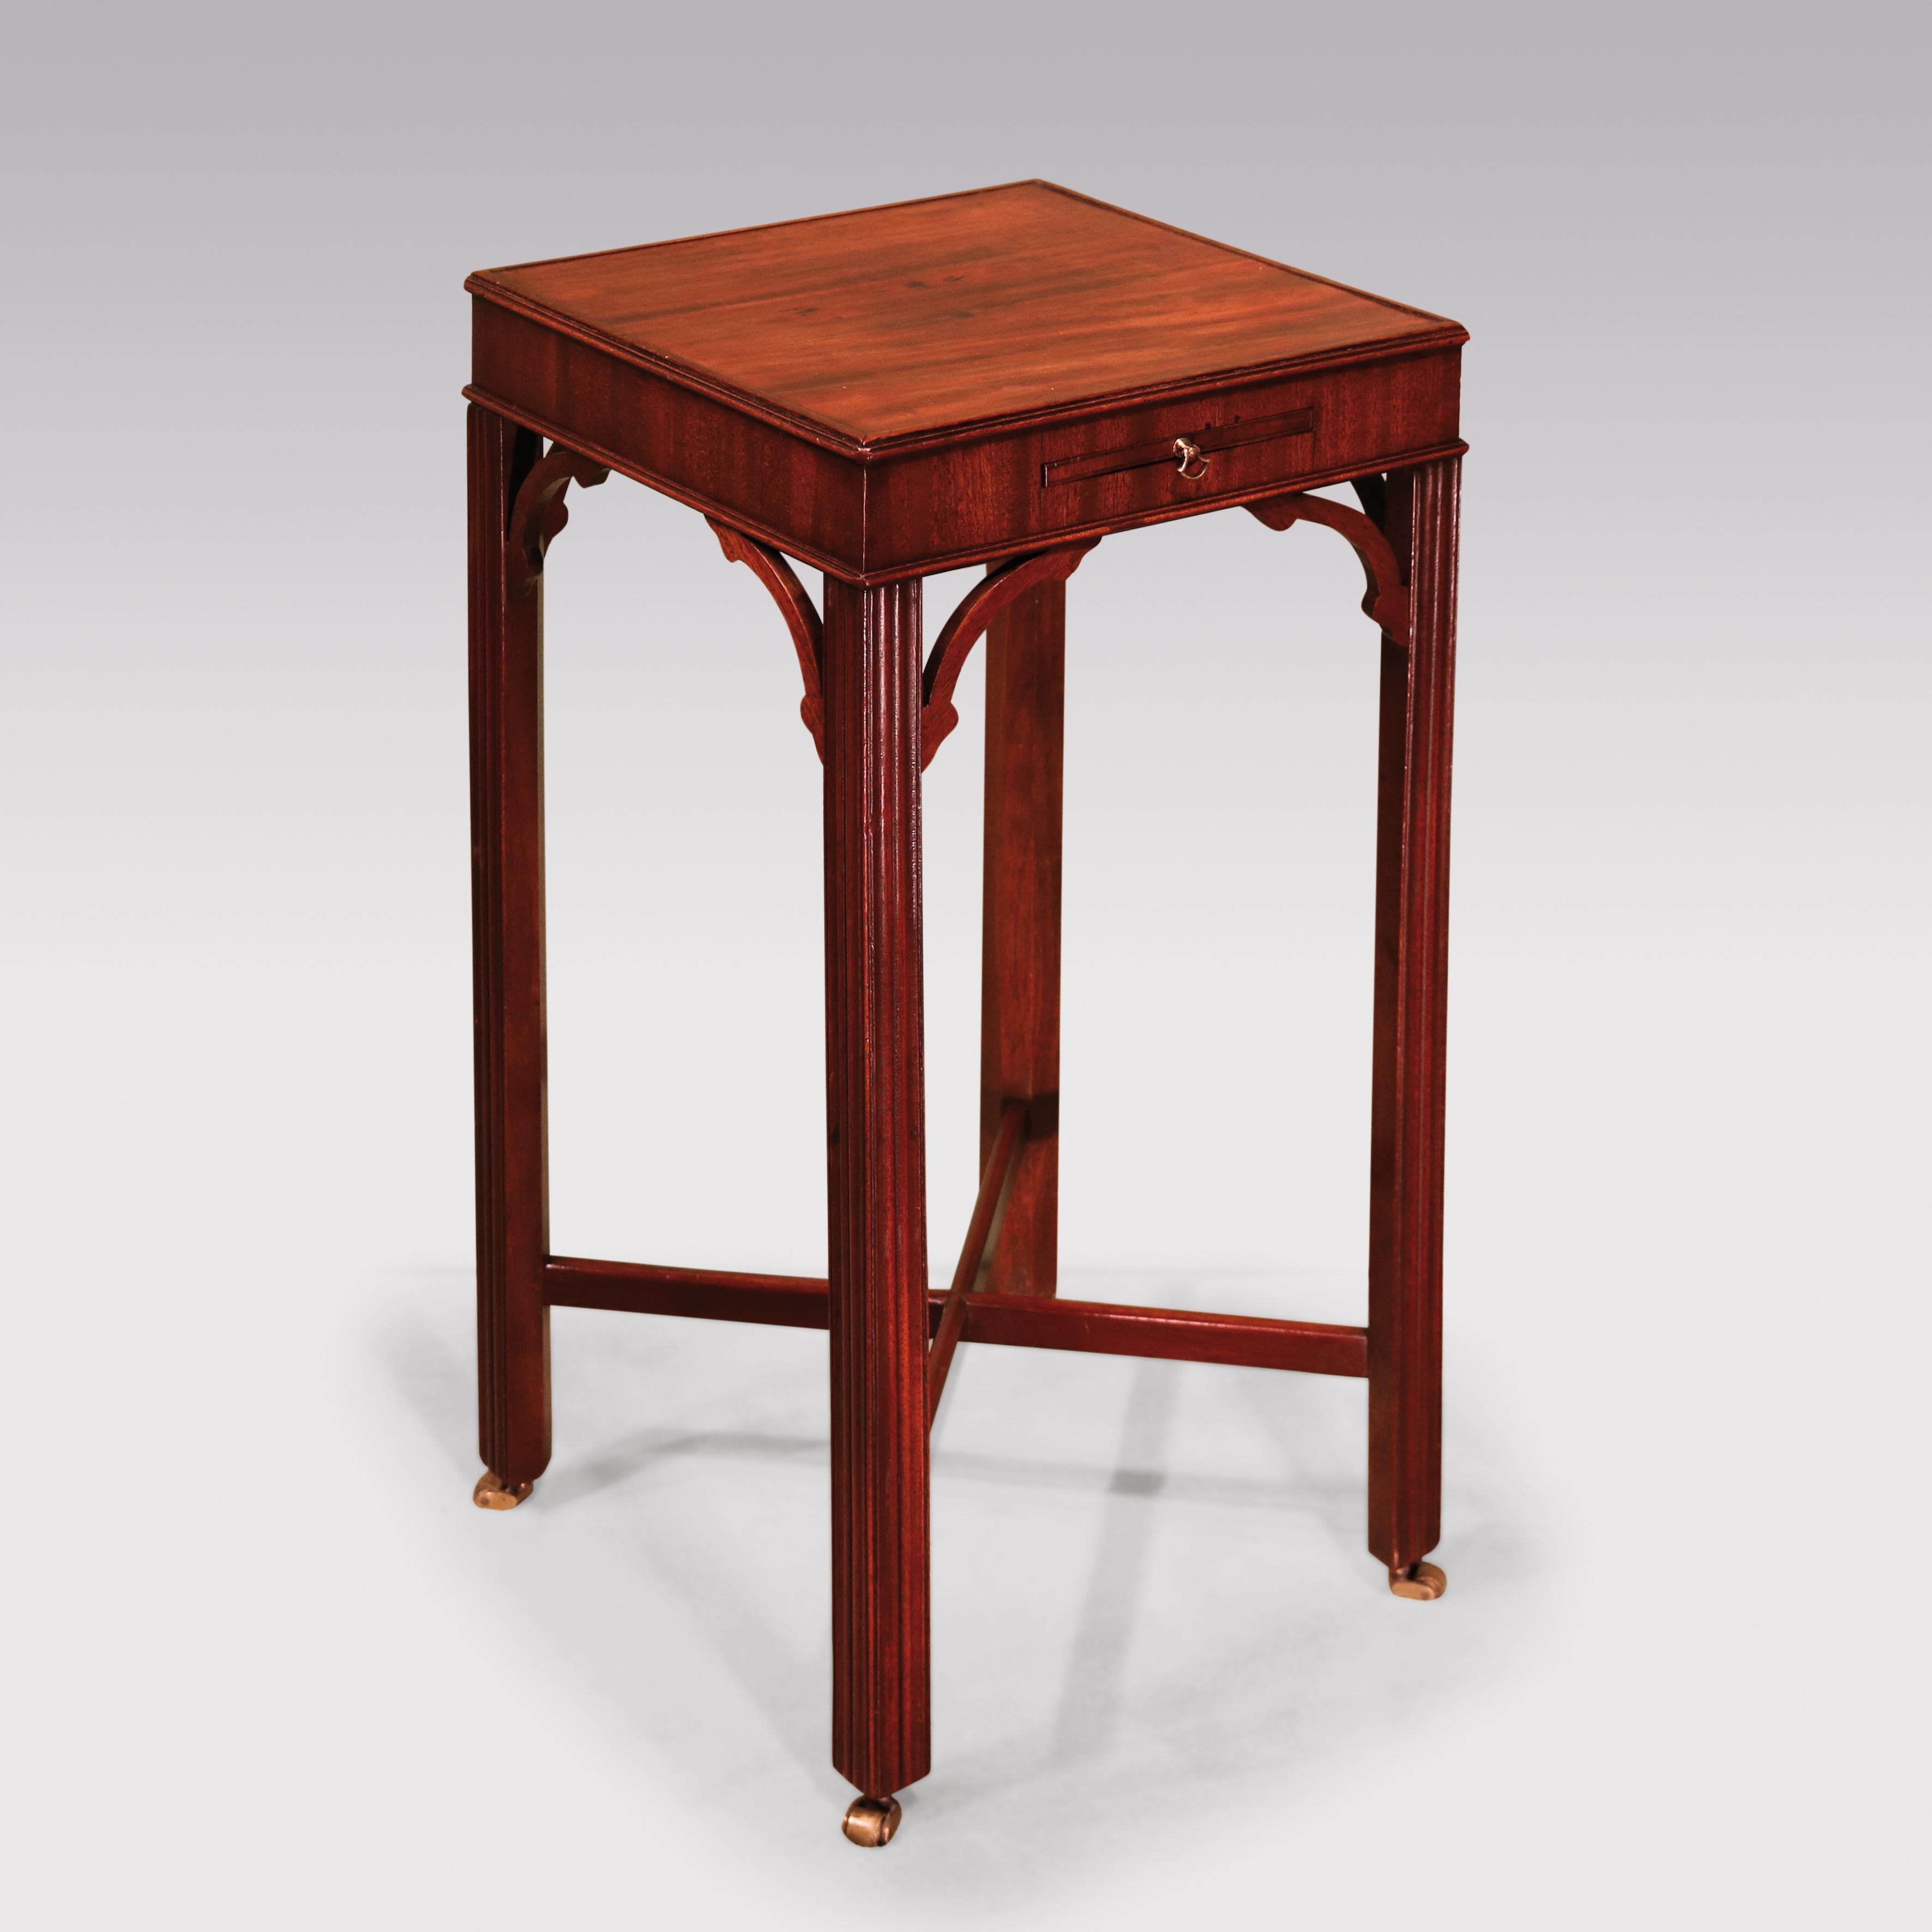 Mid 18th century George III period mahogany Kettle Stand, having square moulded edged top above frieze with slide, supported on moulded chamfered legs with Gothic scroll corner brackets & cross stretchers retaining original brass castors.